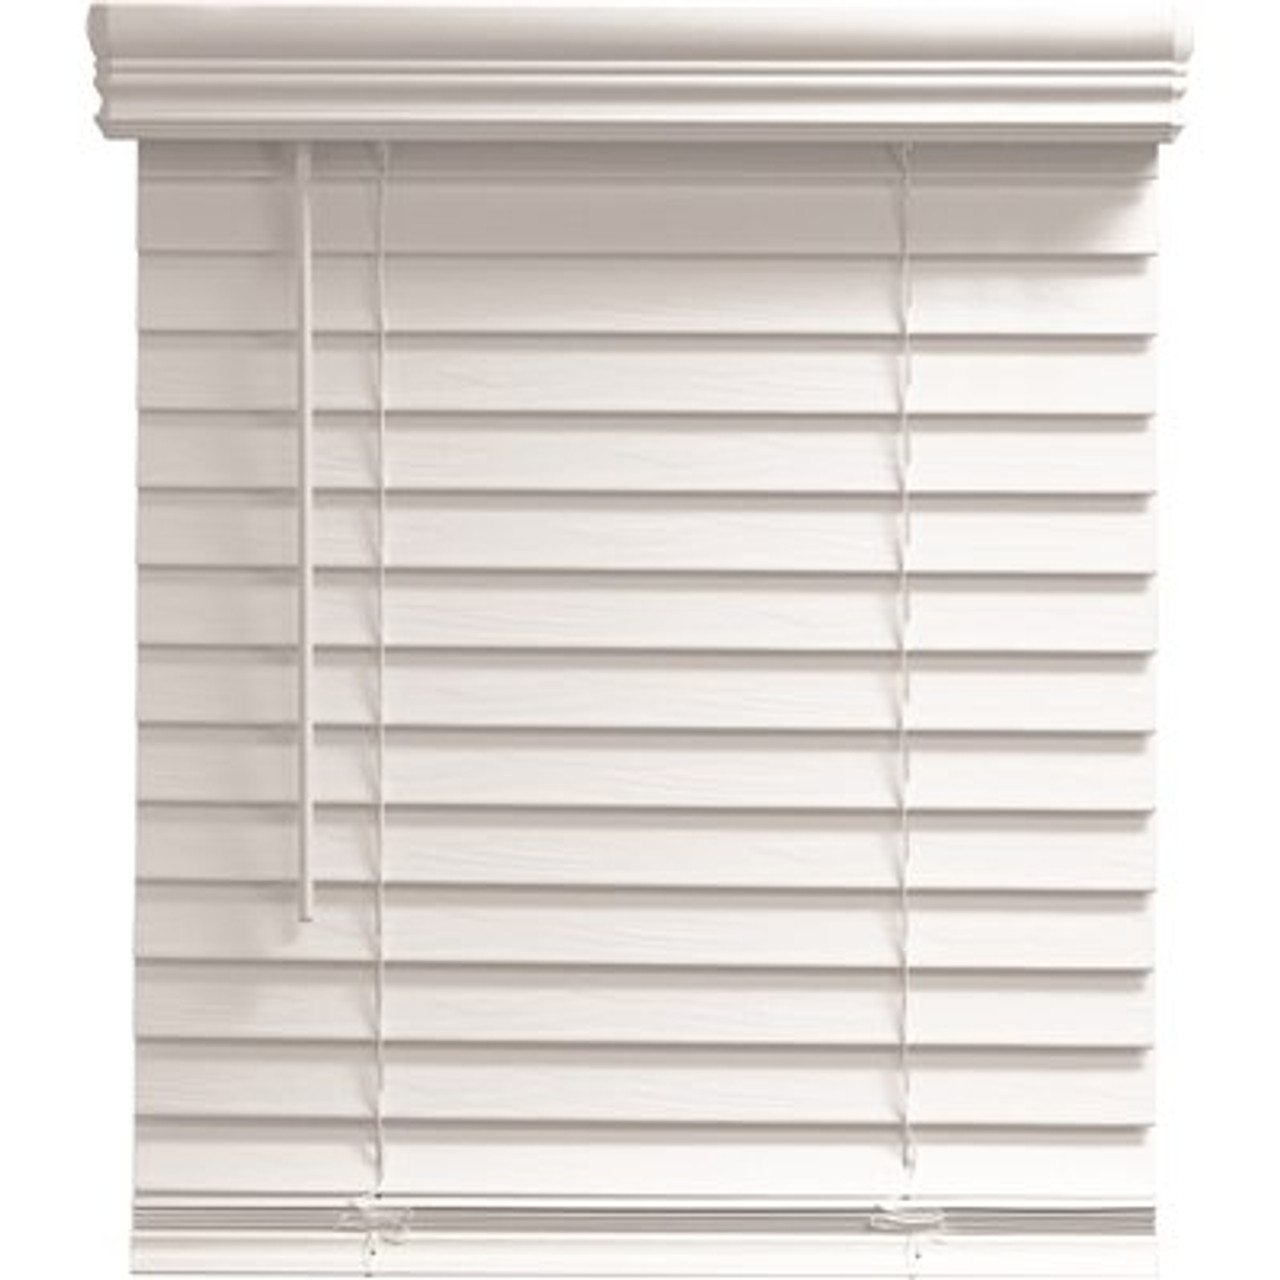 Champion TruTouch 23x48" Cordless 2" Faux Wood Blind White